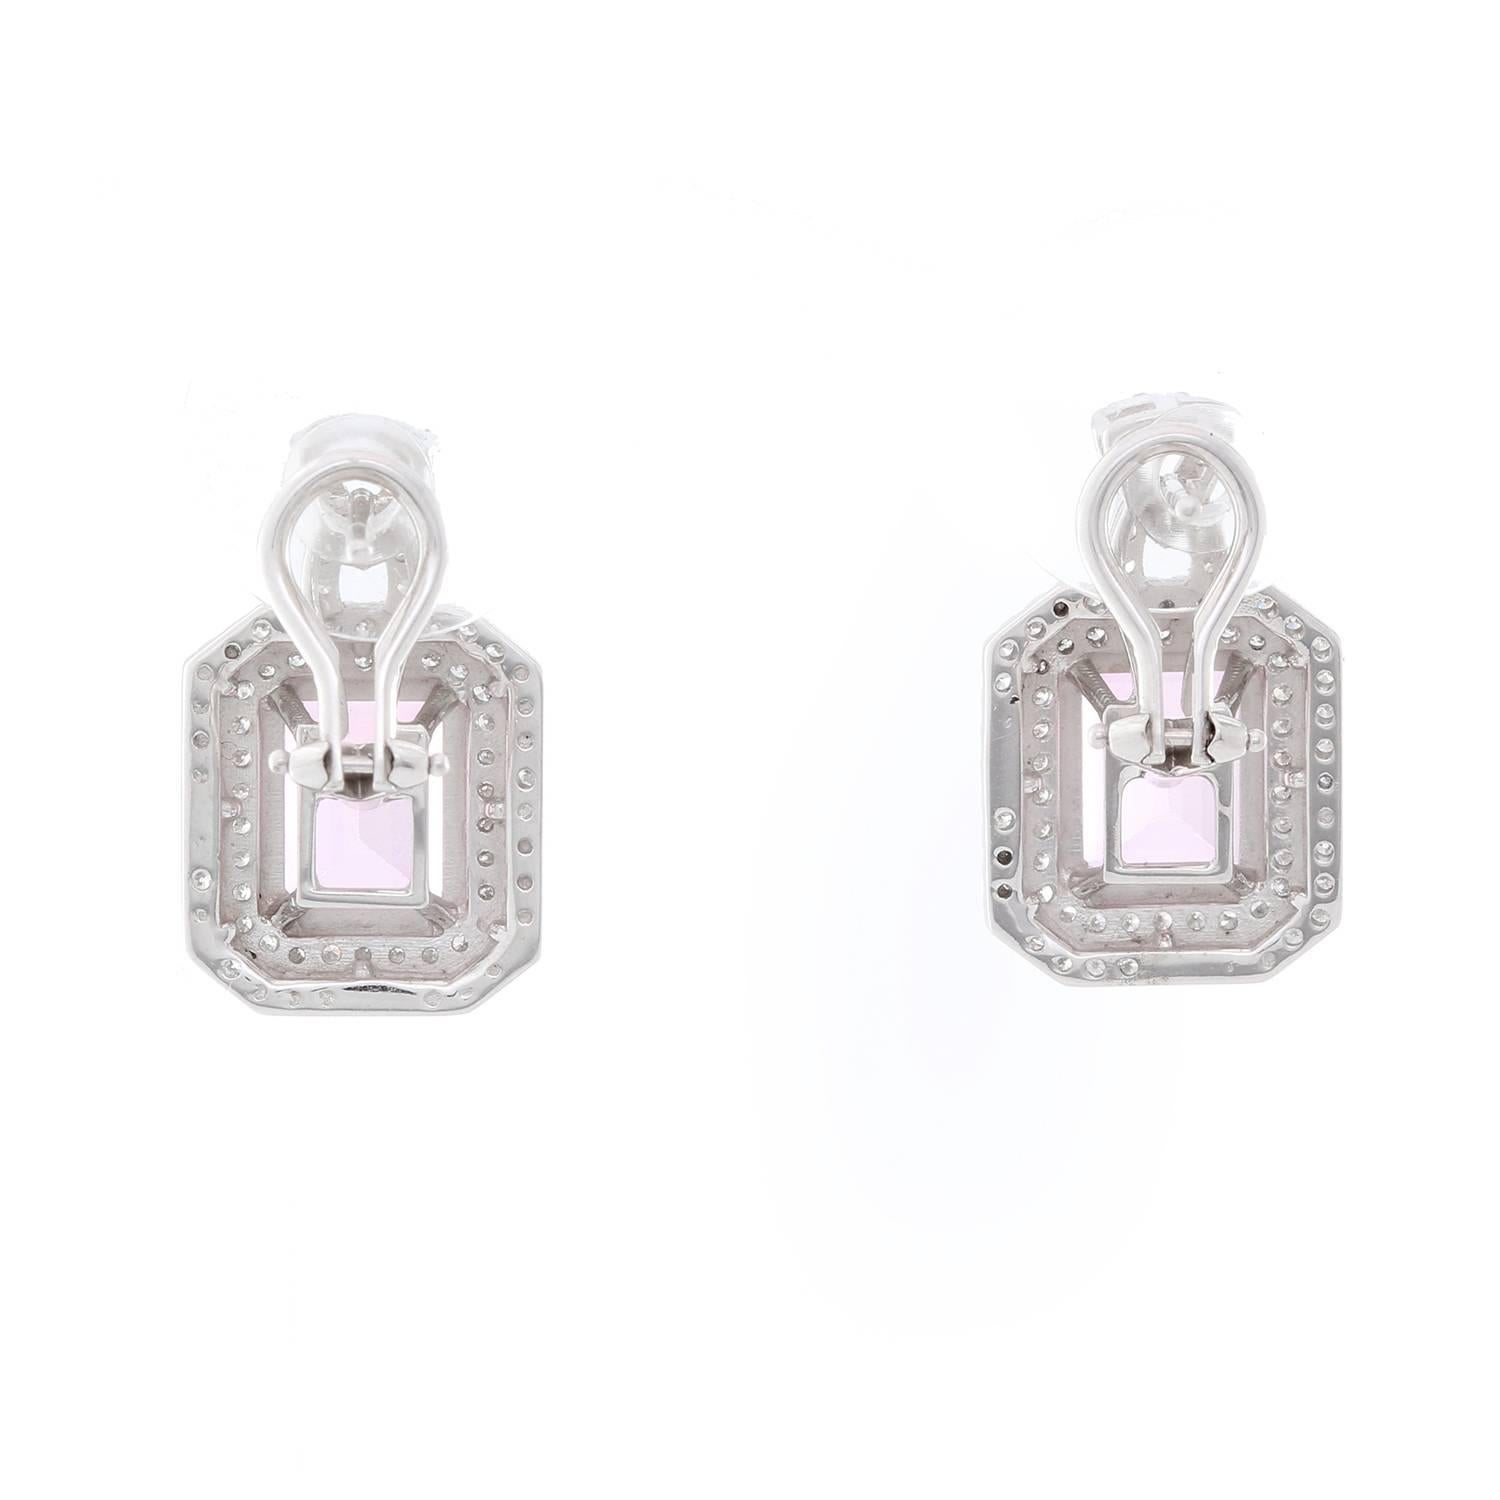 14K White Gold Pink Topaz  Diamond Earrings - . 14K White Gold earrings featuring an Emerald cut Pink Topaz, weighing 5 cts. Surrounded by diamonds weighing 1.10 cts.  Total measure 1  x 1 1/2 inches. Total weight 9.7 grams.